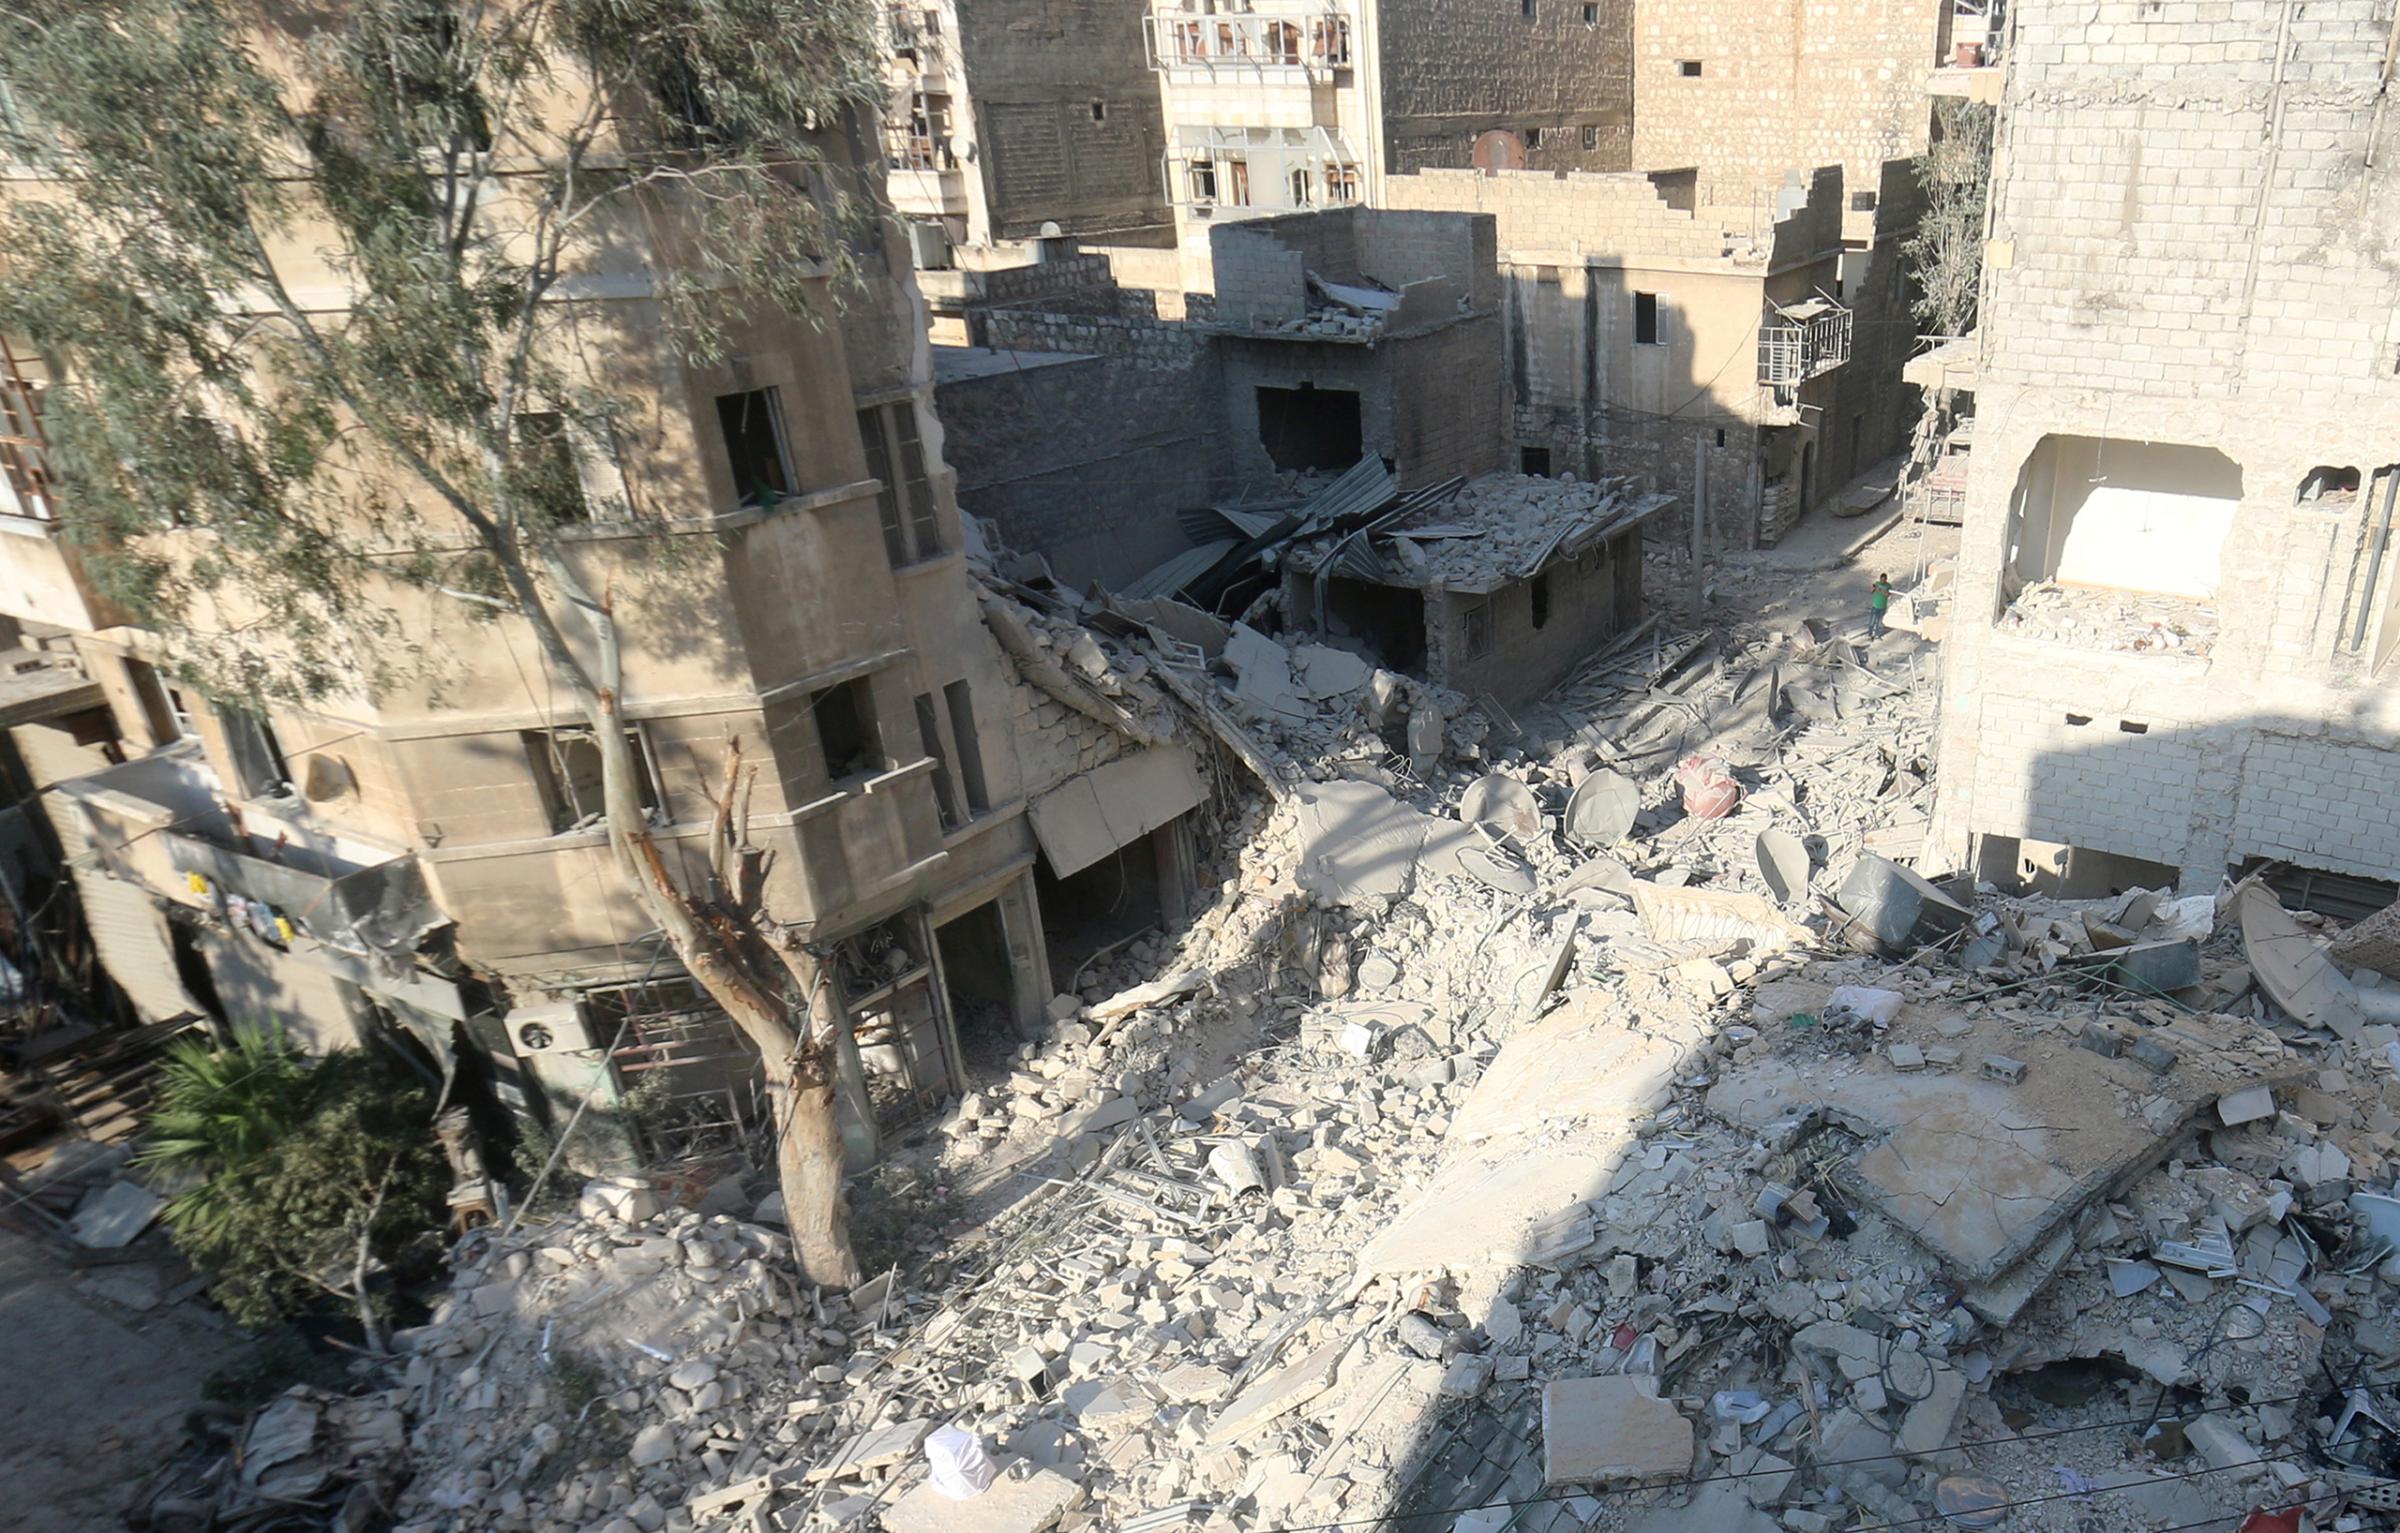 A general view shows the site of the Aug. 17 airstrike where five-year-old Omran Daqneesh and his family were injured in the rebel-held Qaterji neighborhood of Aleppo, Syria, on Aug. 18, 2016. The Daqneesh family lived in the building on the left.